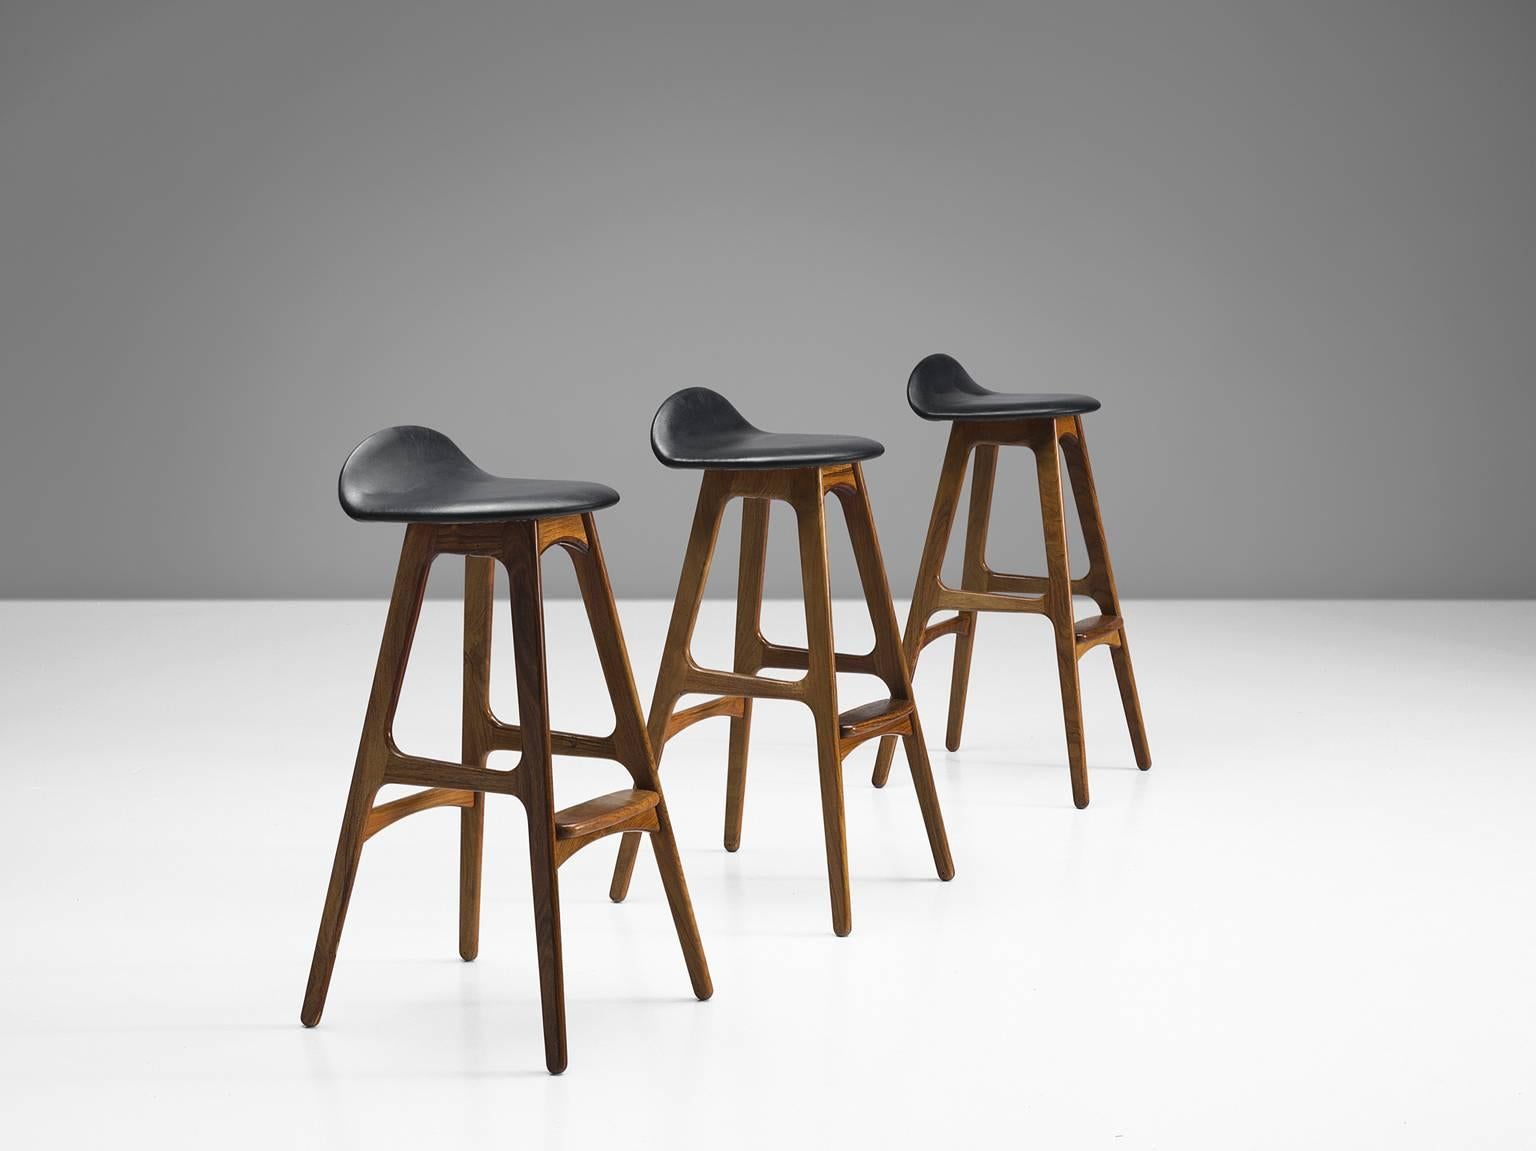 Erik Buch for O.D. Mobler, bar stools, rosewood and black faux leather, Denmark, circa 1960s.

Distinctive set of three barstools by Erik Buck (1923-1982). Buch had over 30 commercially successful production designs over his career but none so